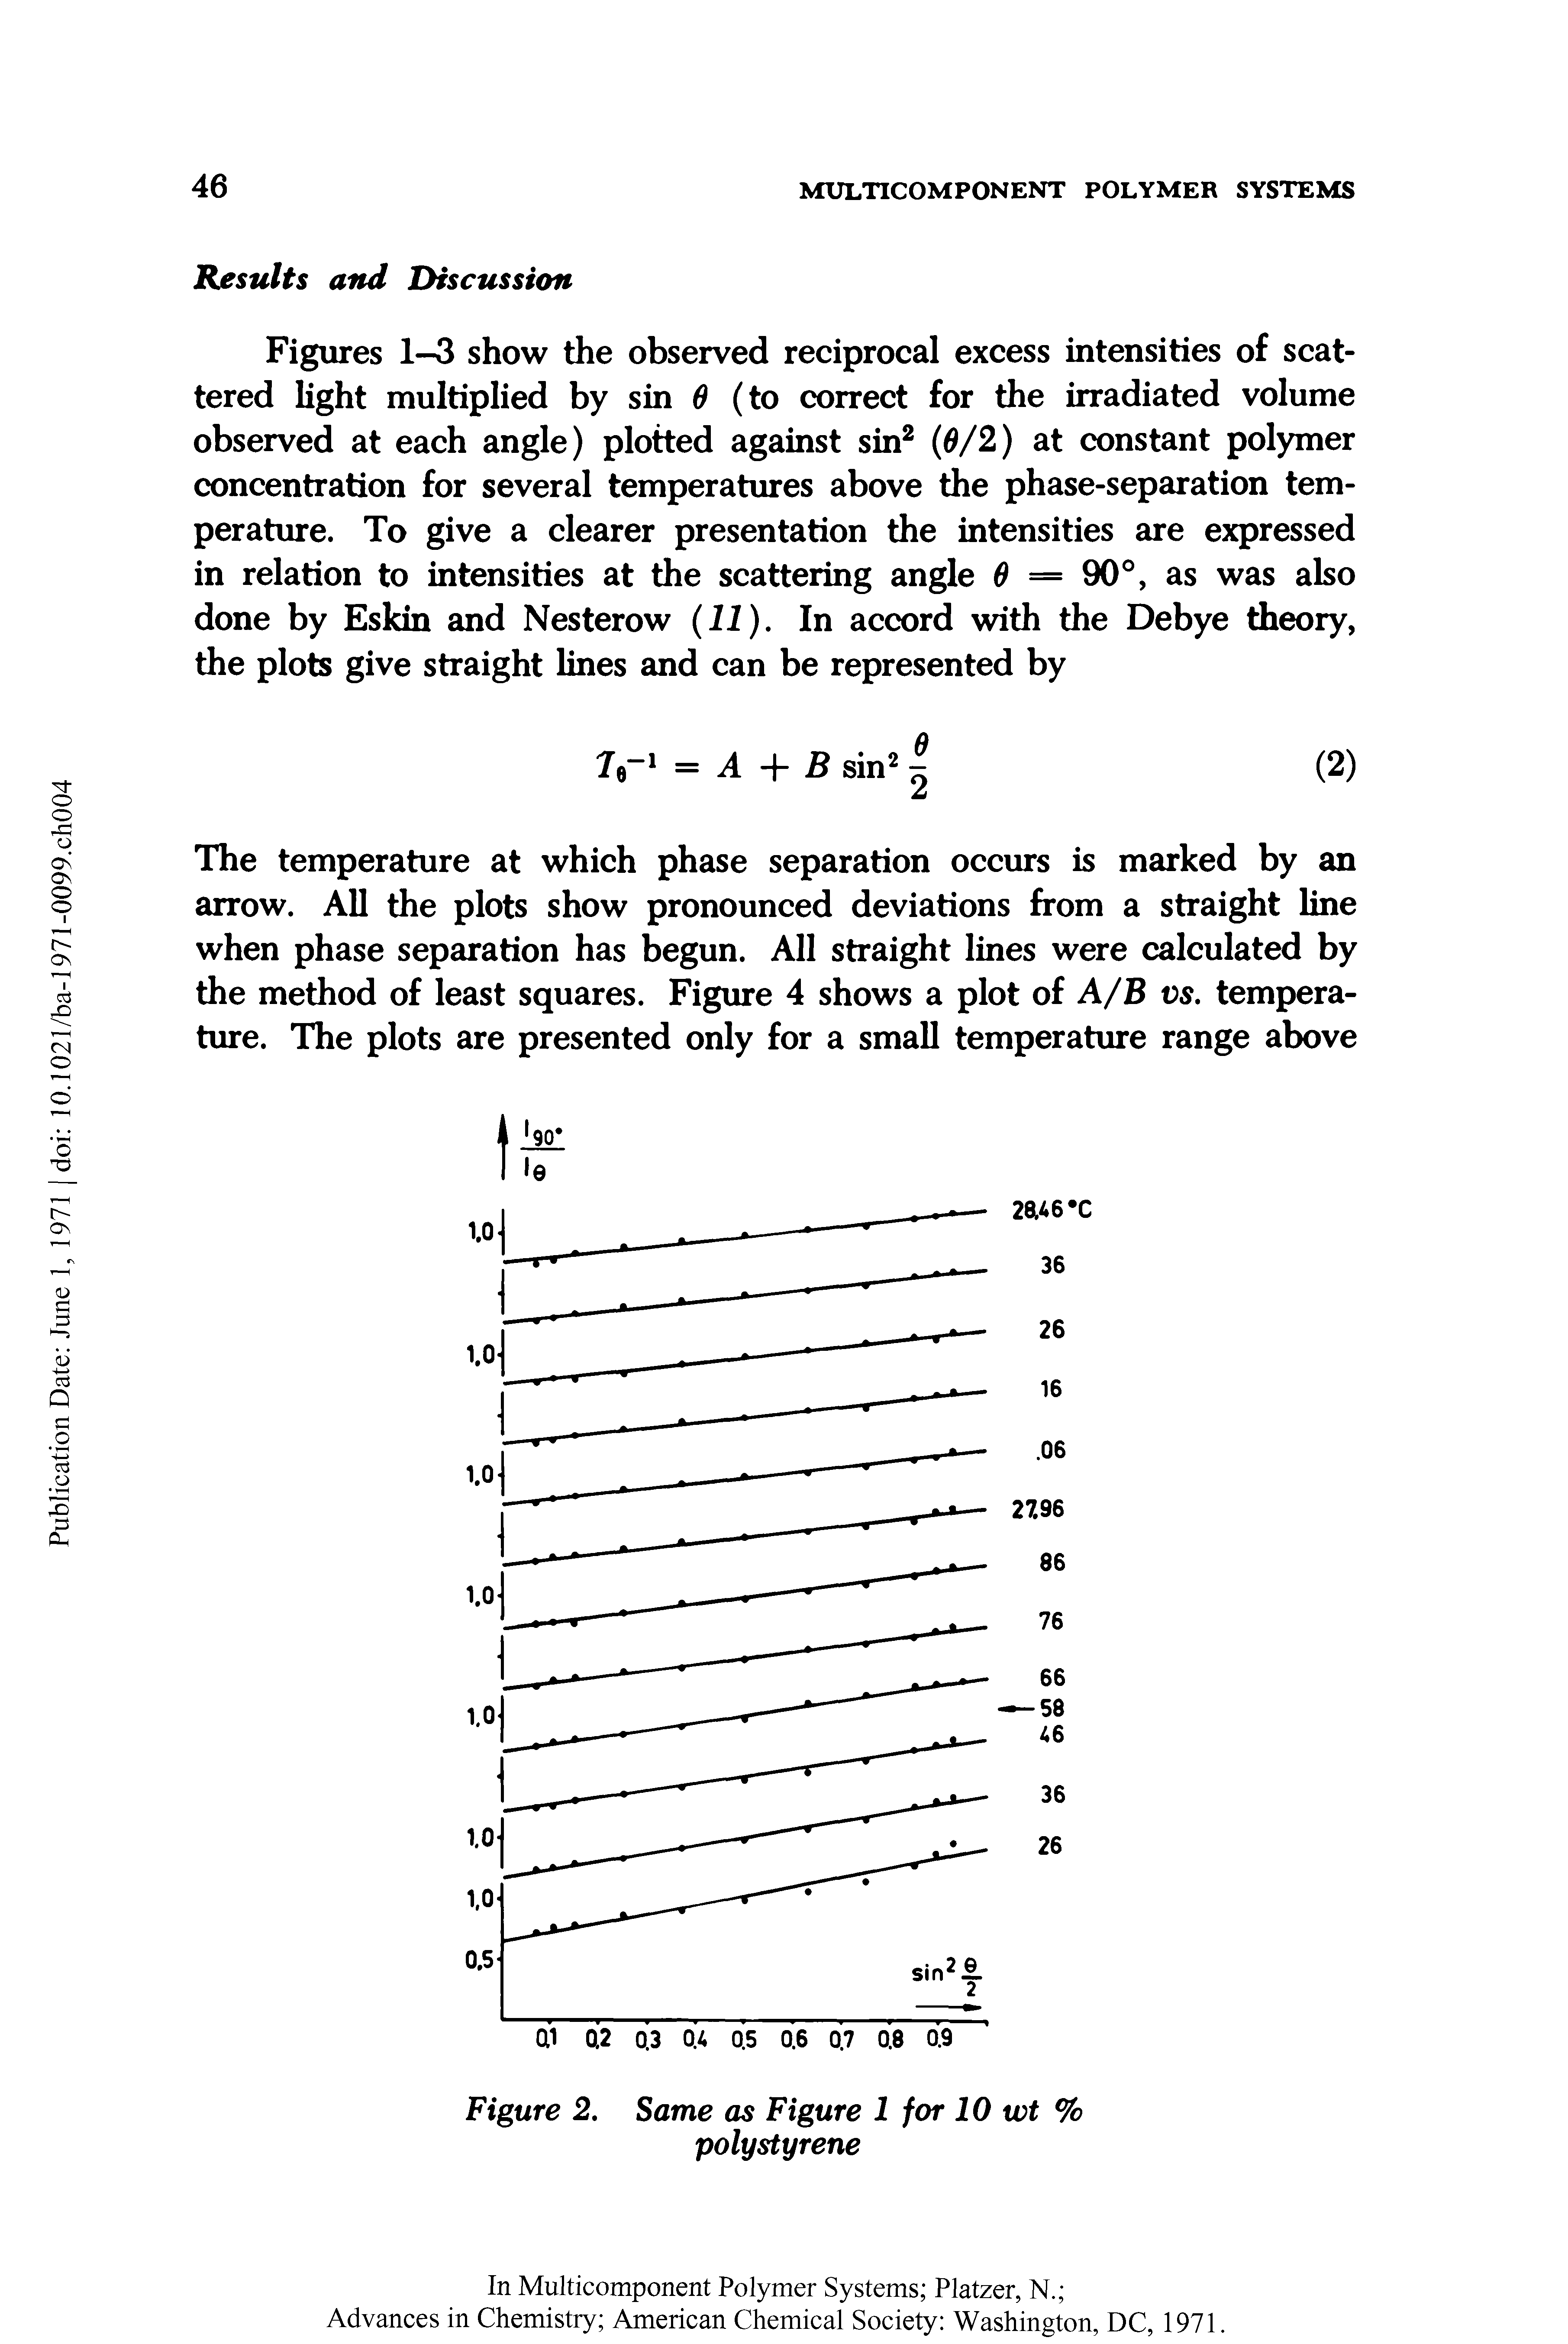 Figures 1-3 show the observed reciprocal excess intensities of scattered light multiplied by sin 0 (to correct for the irradiated volume observed at each angle) plotted against sin2 (0/2) at constant polymer concentration for several temperatures above the phase-separation temperature. To give a clearer presentation the intensities are expressed in relation to intensities at the scattering angle 0 = 90°, as was also done by Eskin and Nesterow (11). In accord with the Debye theory, the plots give straight lines and can be represented by...